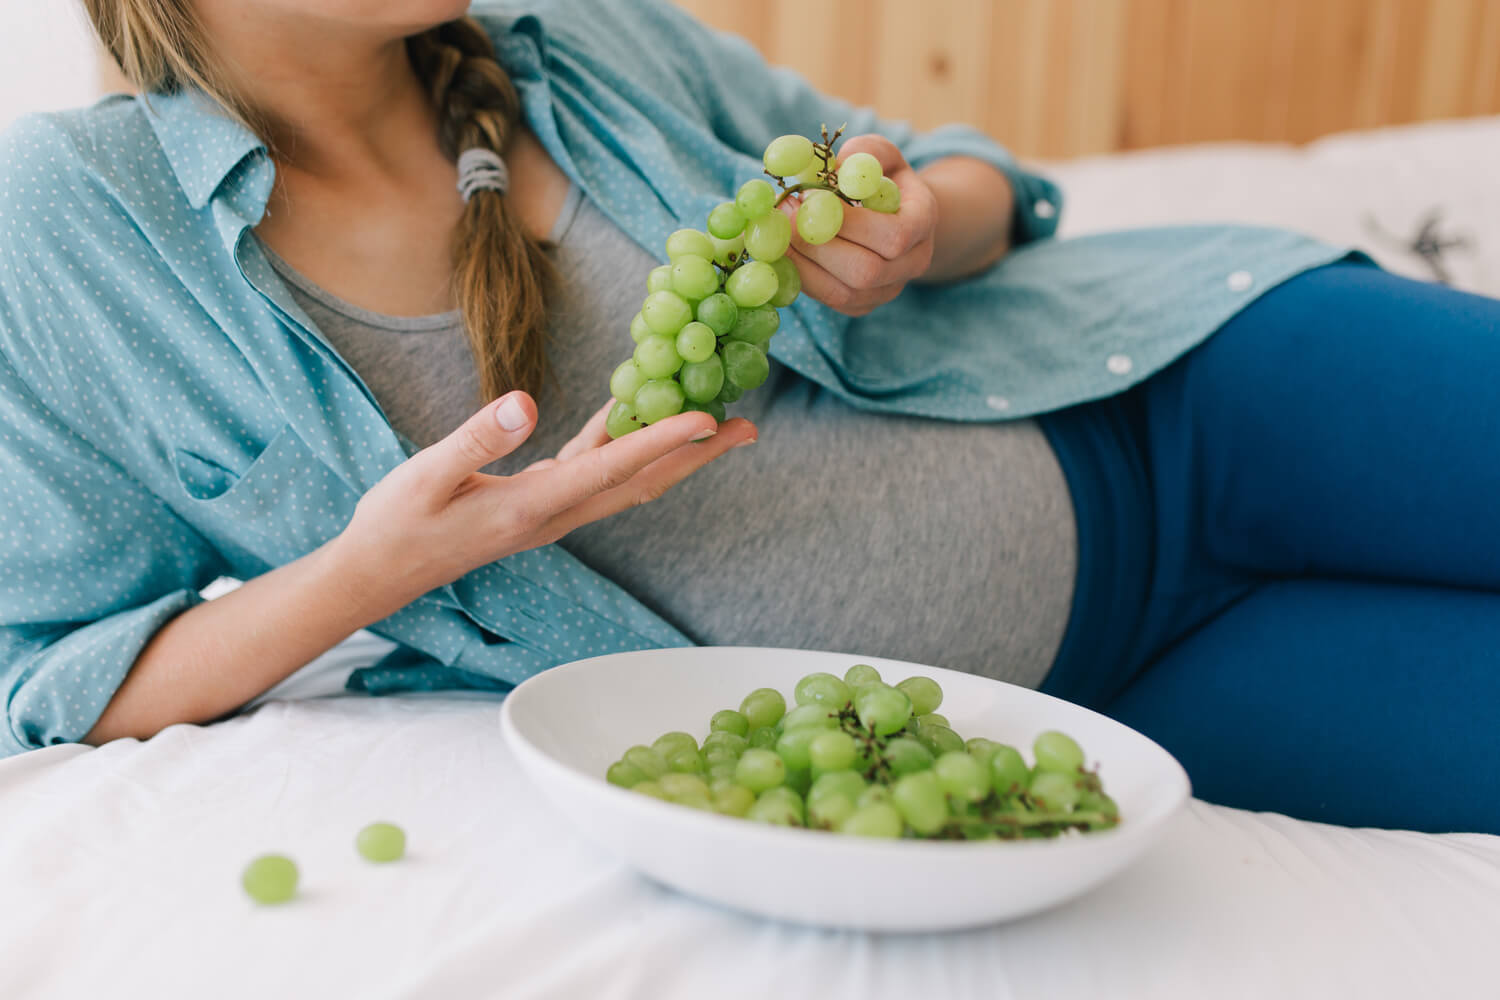 grapes during pregnancy